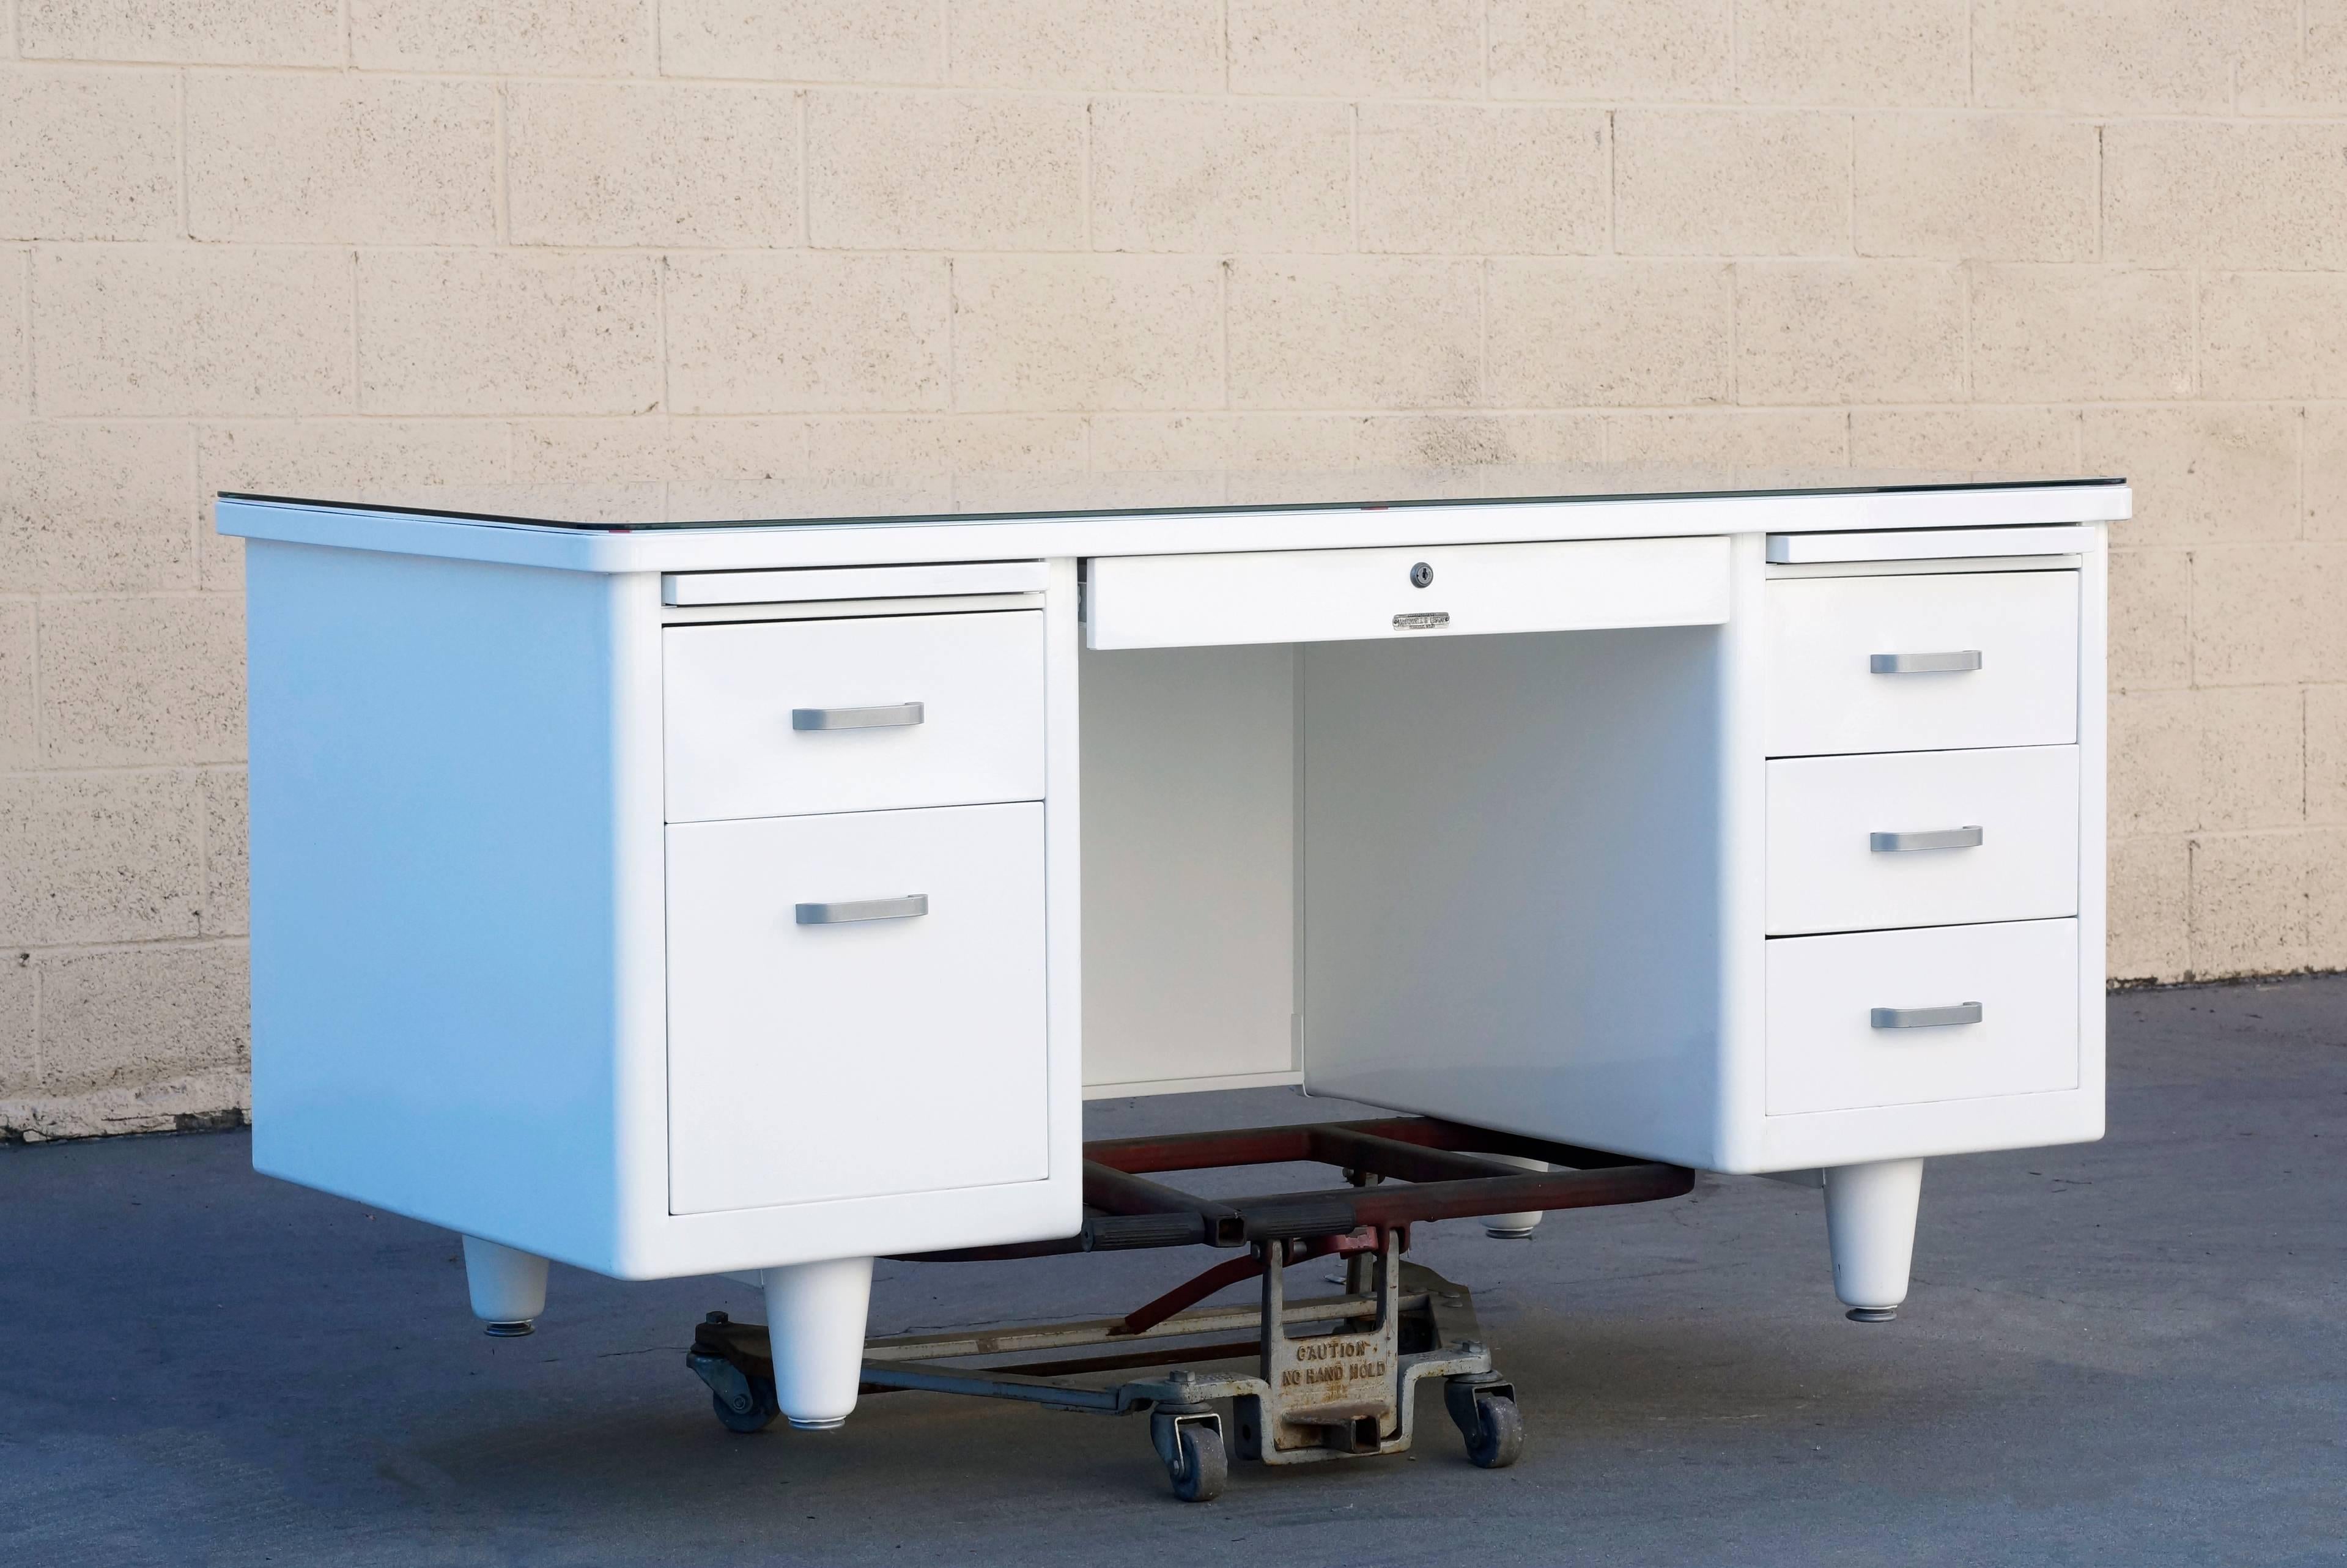 1960s McDowell Craig tanker refinished in gloss white with custom glass tabletop. This Classic double pedestal desk features many utility drawers, one filing drawer, one locking stationary drawer and two letter trays. All original aluminum hardware,